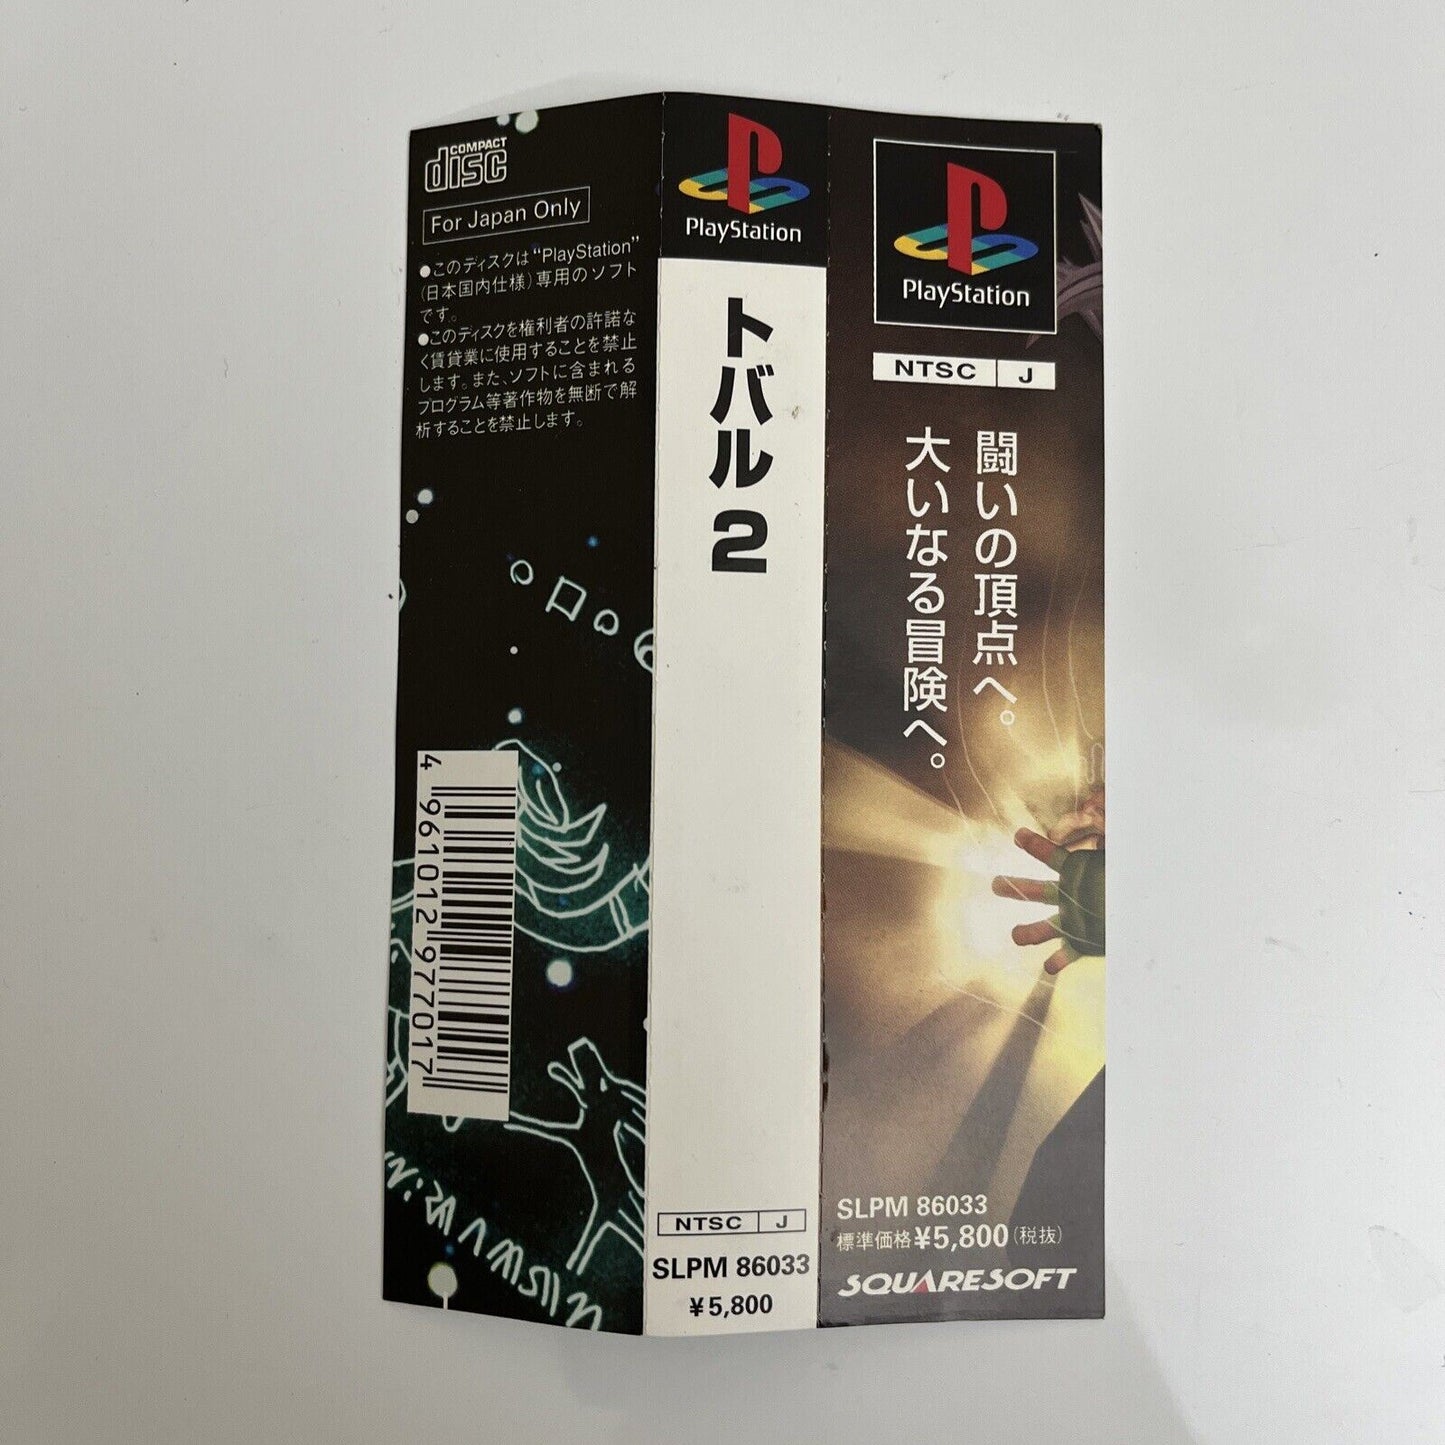 Tobal 2 - Sony PlayStation PS1 NTSC-J JAPAN Square Fighting 1997 Game